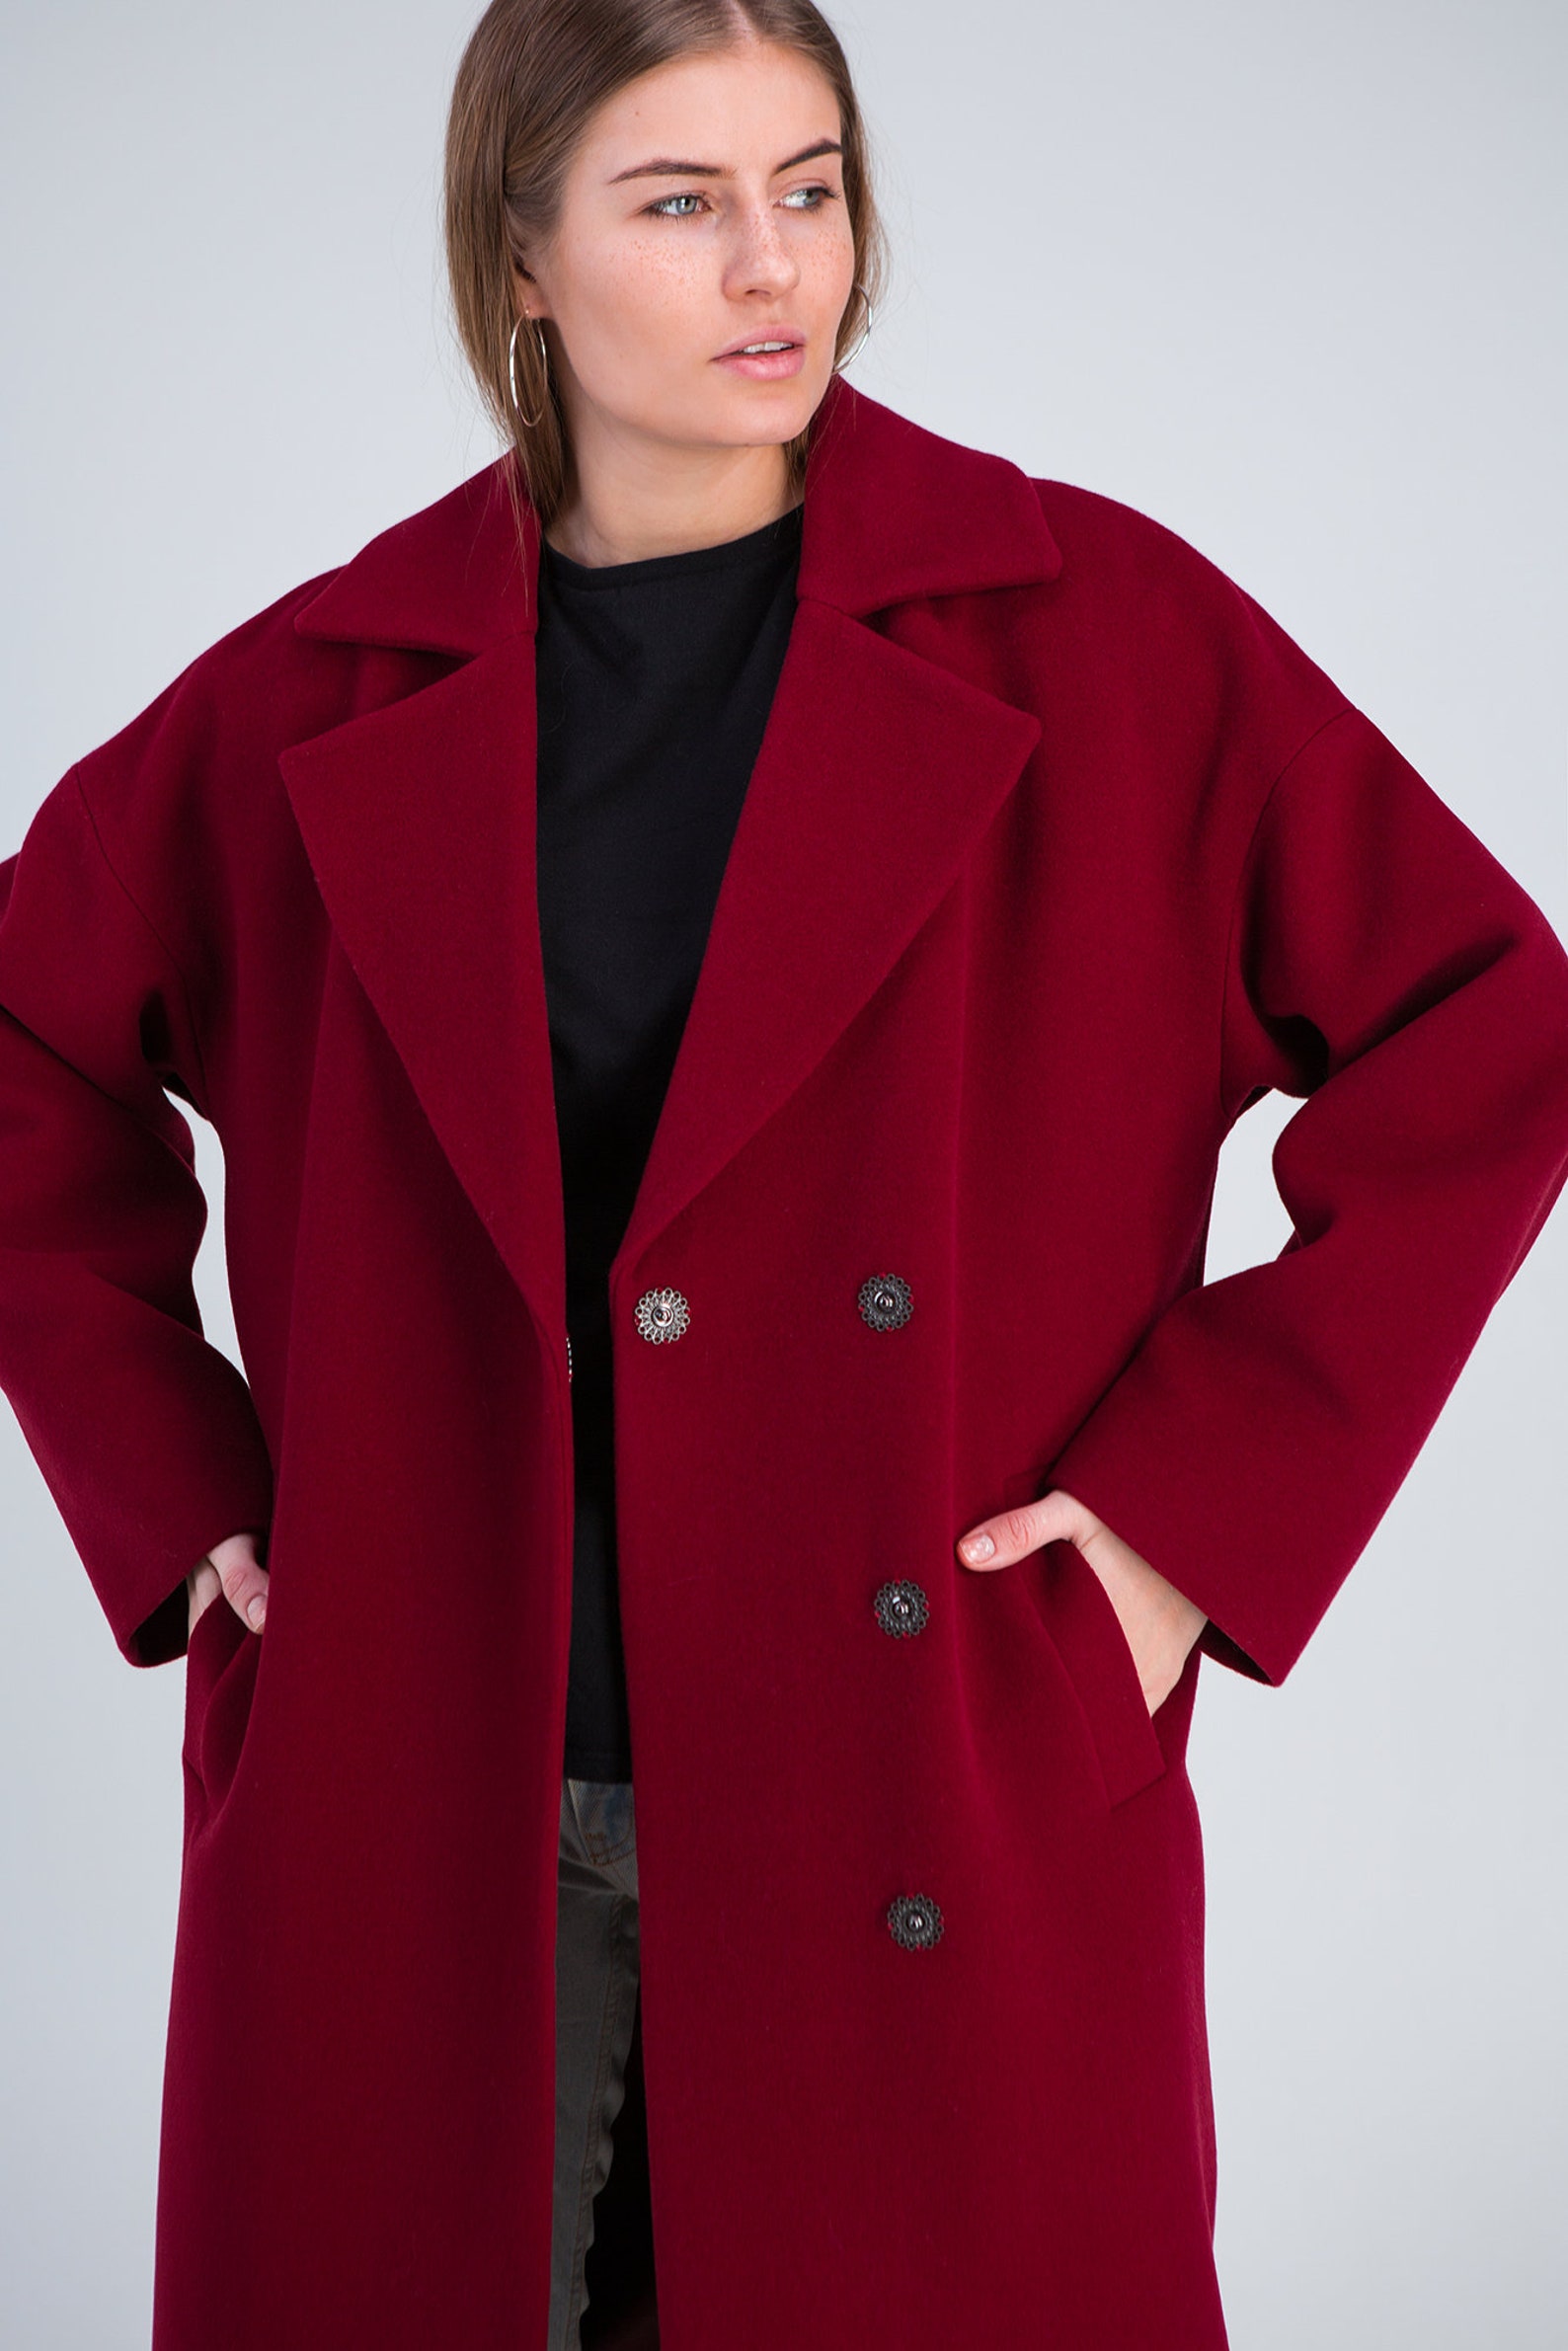 Oversized Lined and Insulated Dark Red Wool Coat / Pure Wool - Etsy